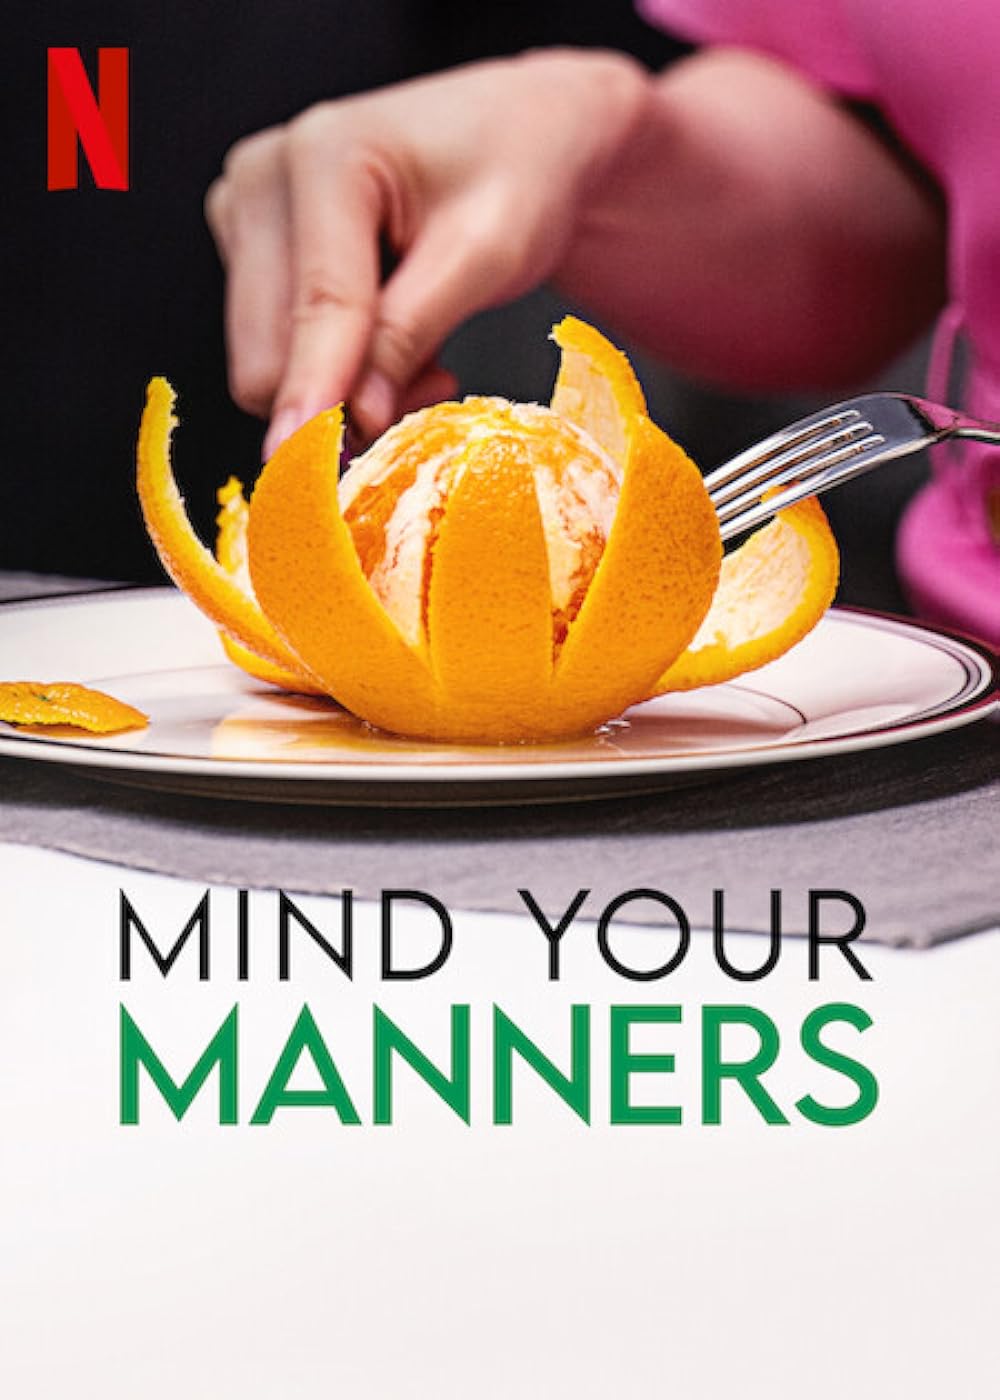 Mind Your Manners